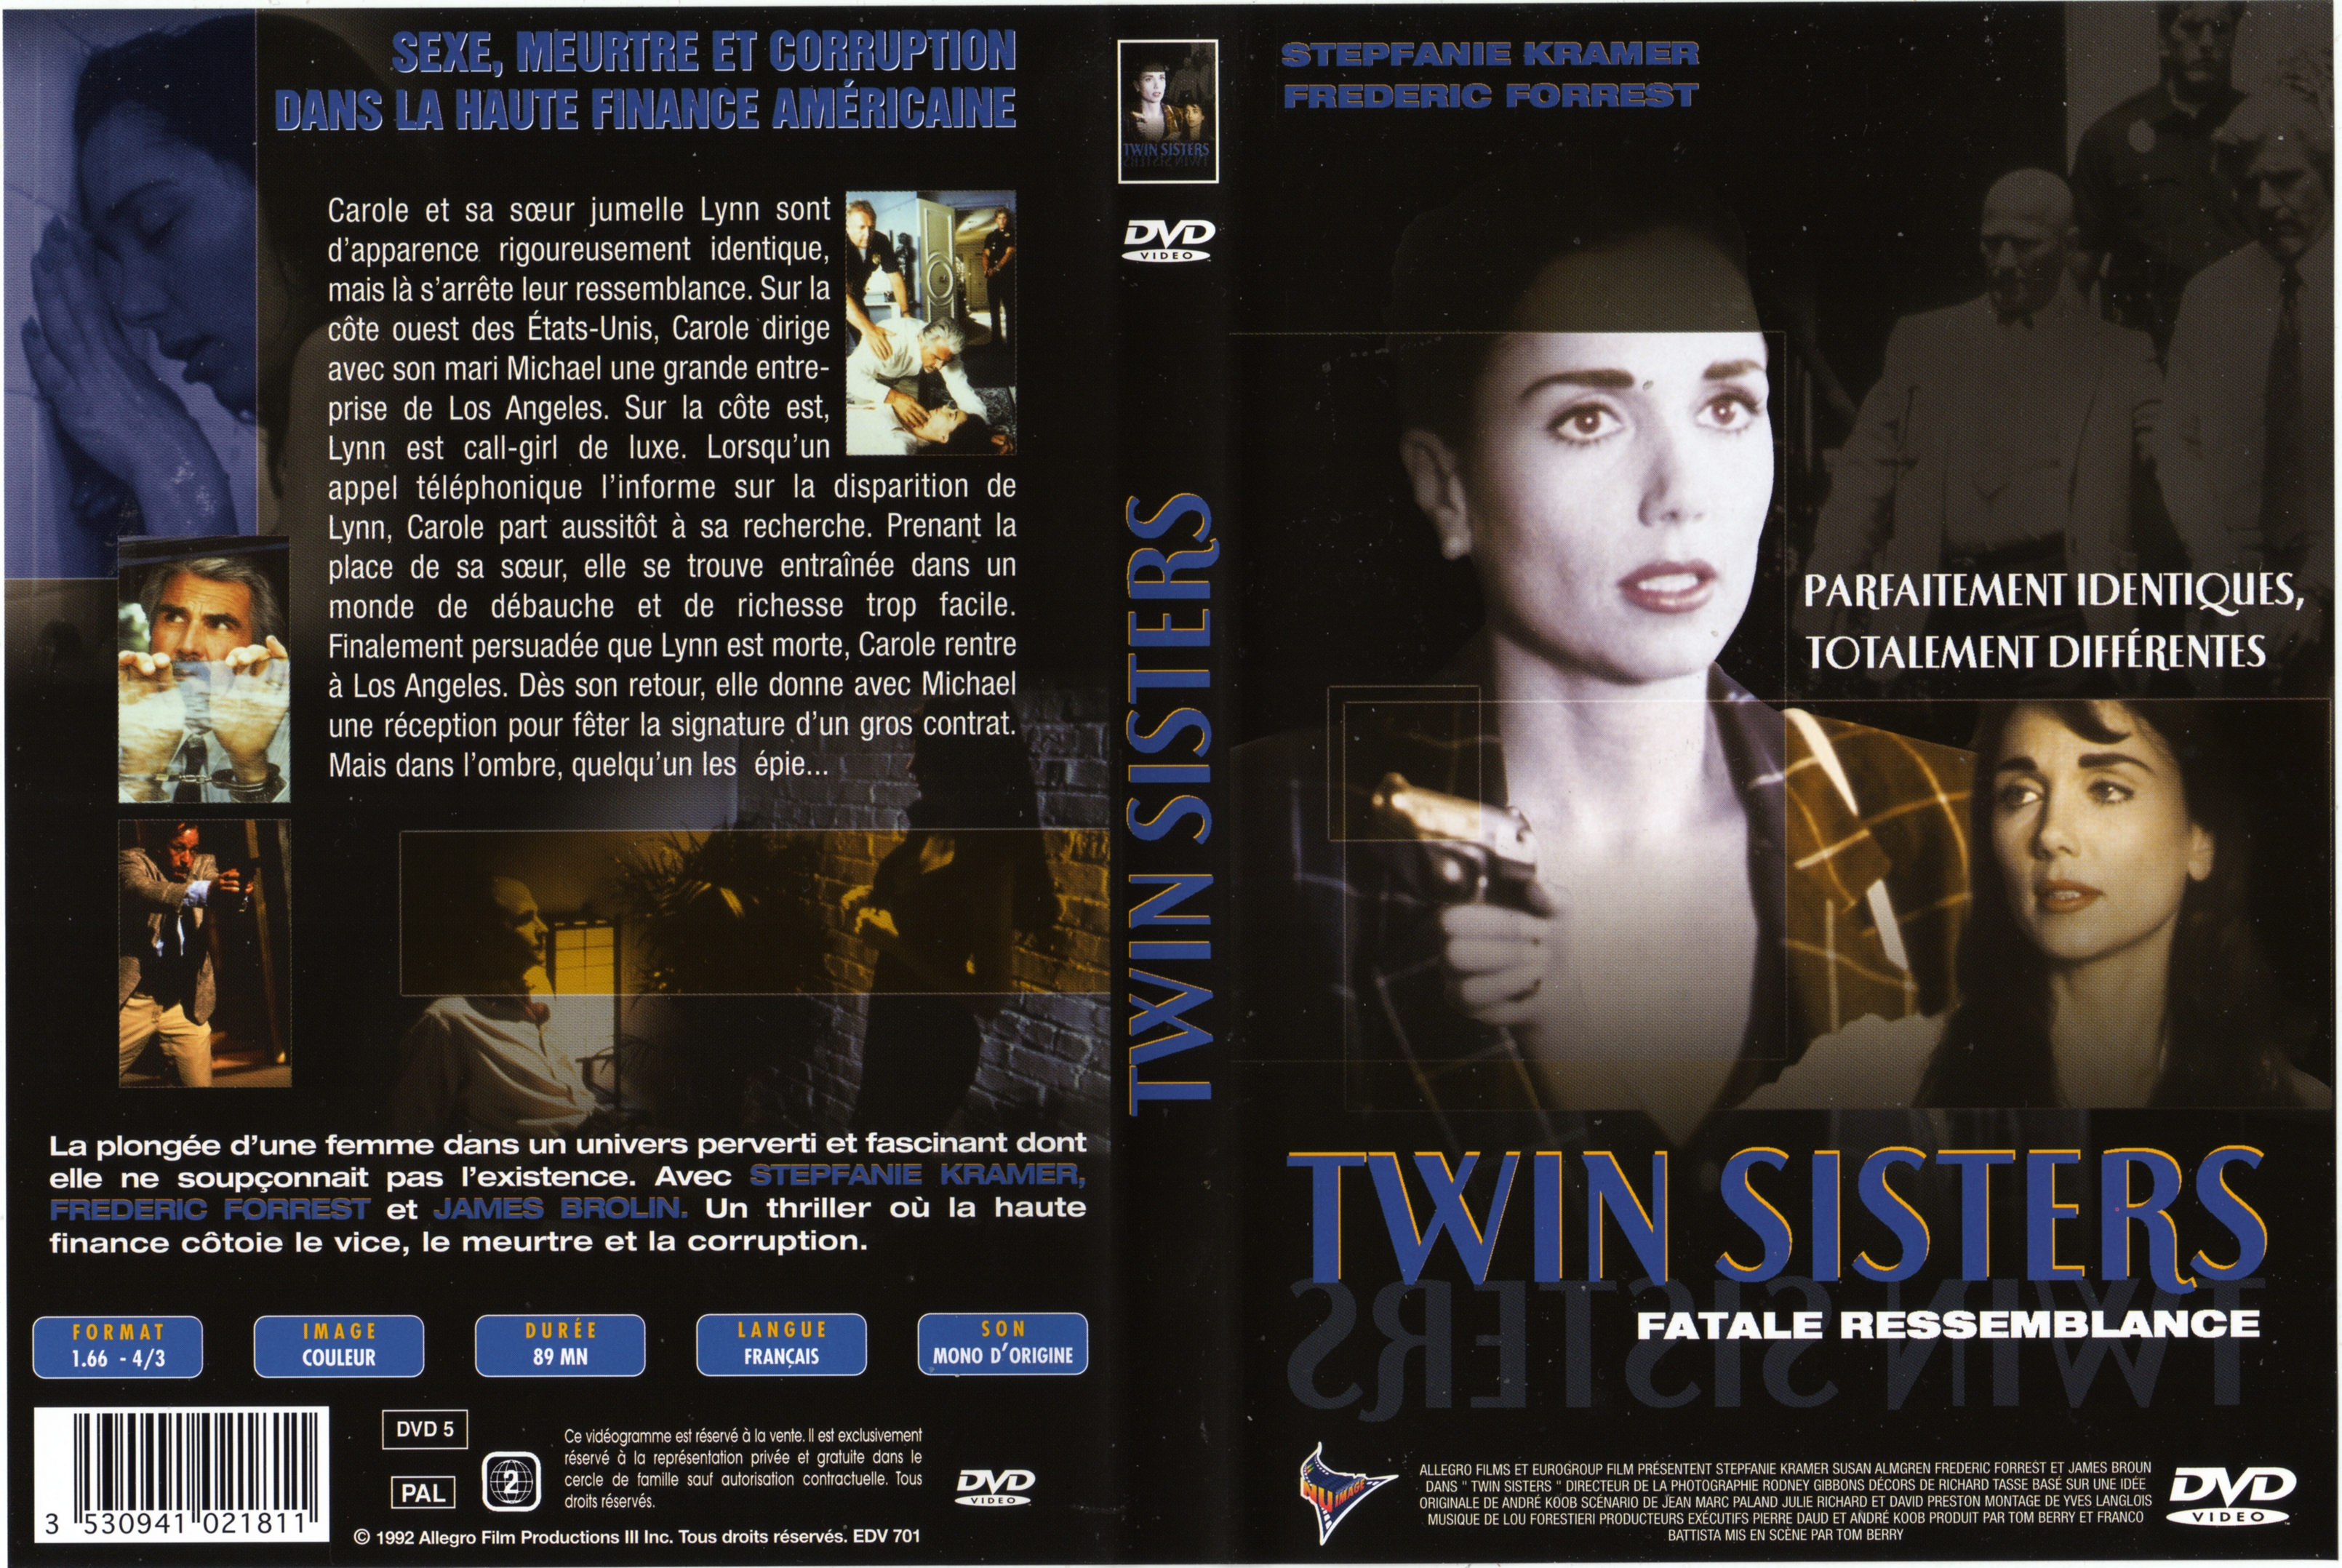 Jaquette DVD Twin sisters